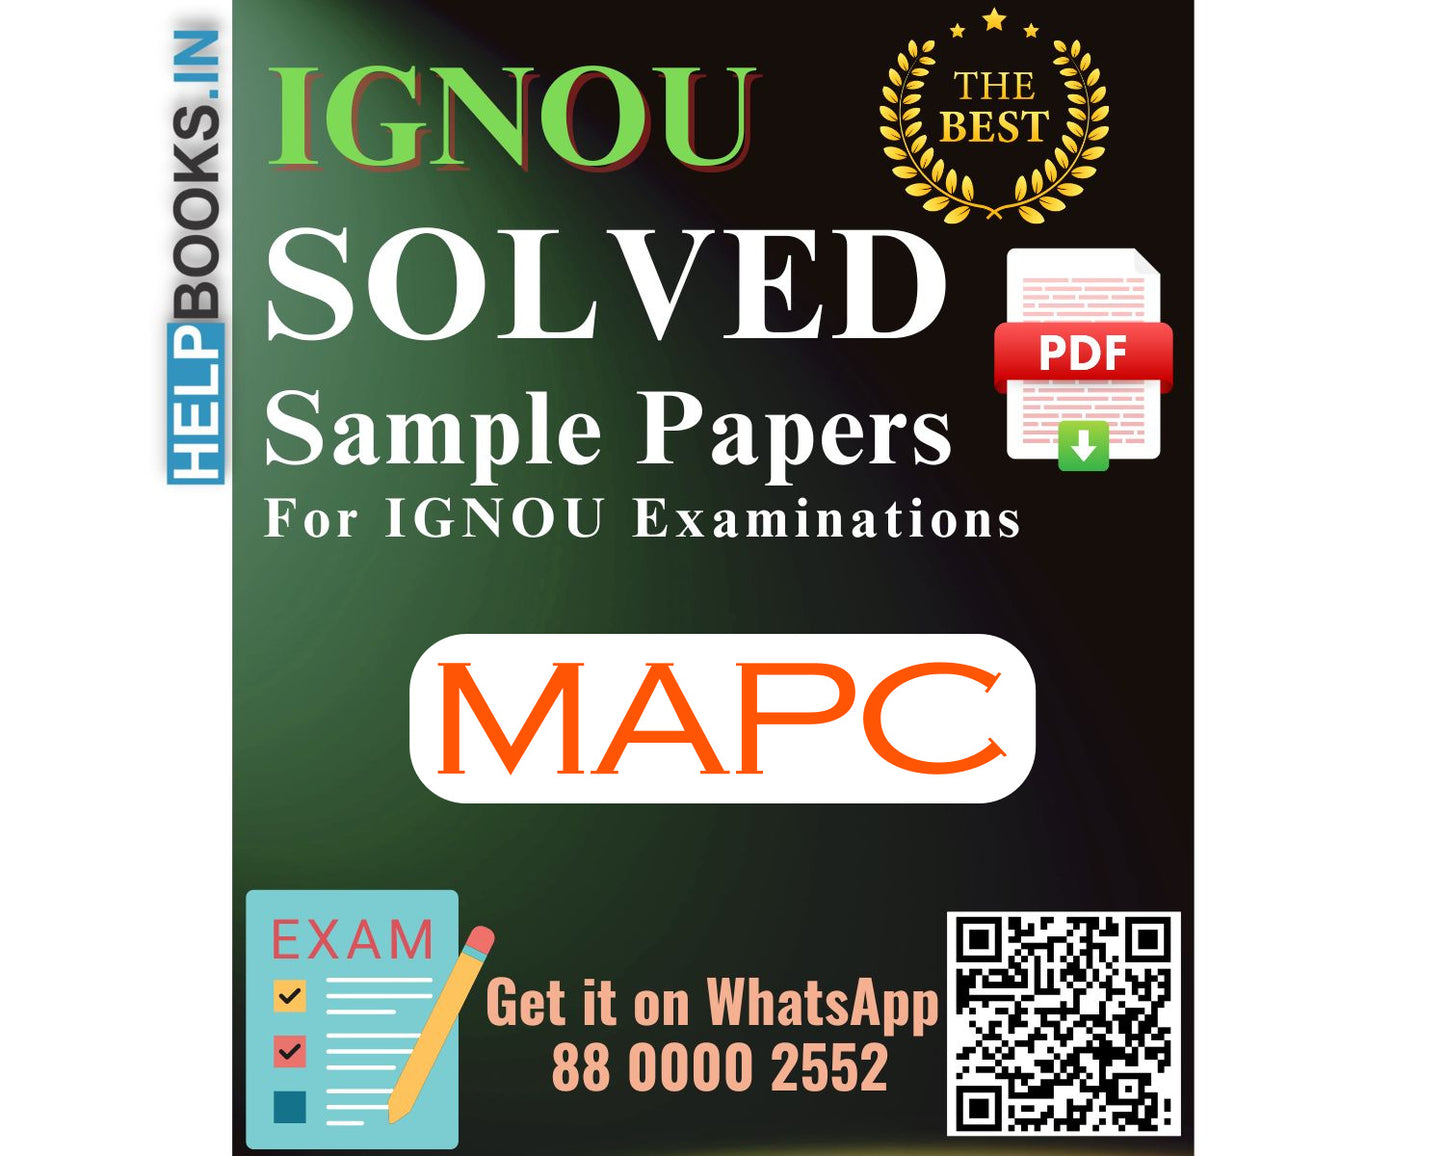 IGNOU Master of Arts (Psychology) (MAPC) | Solved Sample Papers for Exams